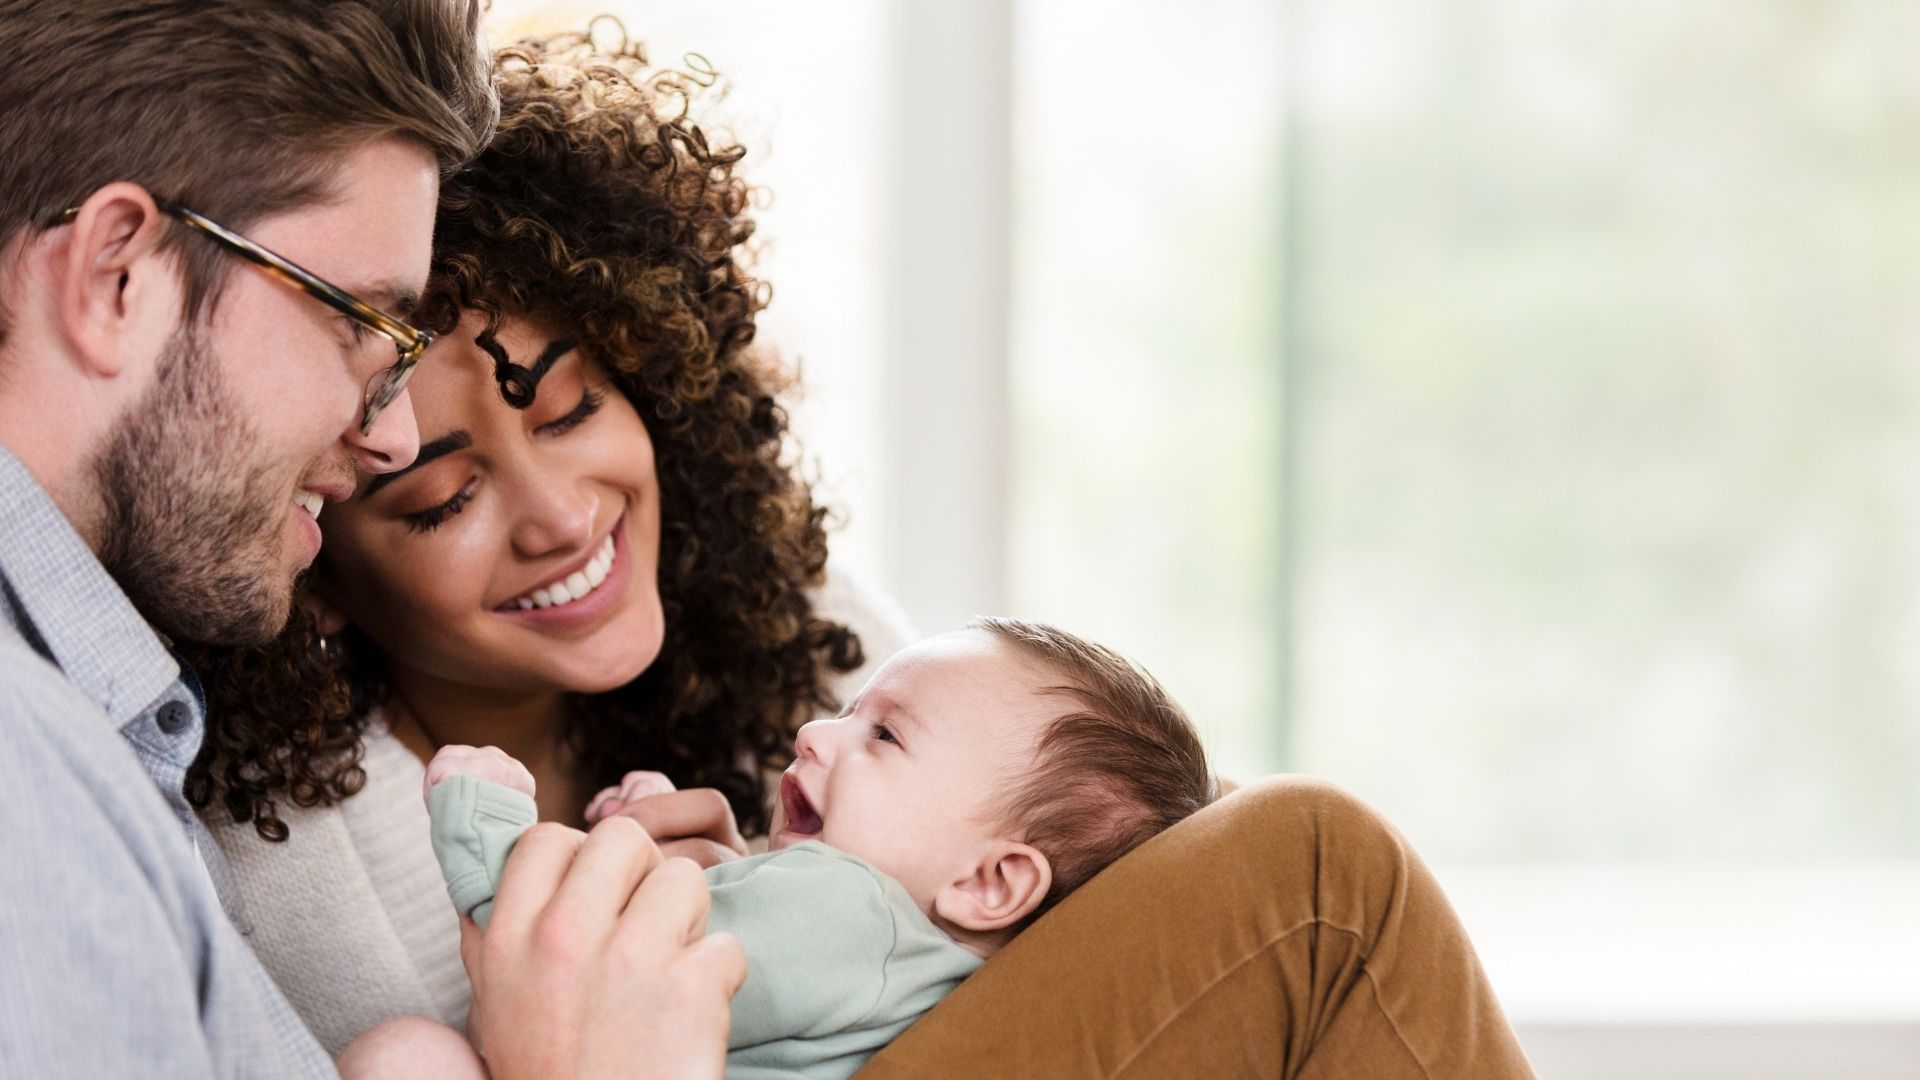 A father with short brown hair and glasses, and a mother with dark brown curly hair both looking down and smiling at a smiling baby who is looking up at them. The baby is on the father’s lap with the knees propped up.